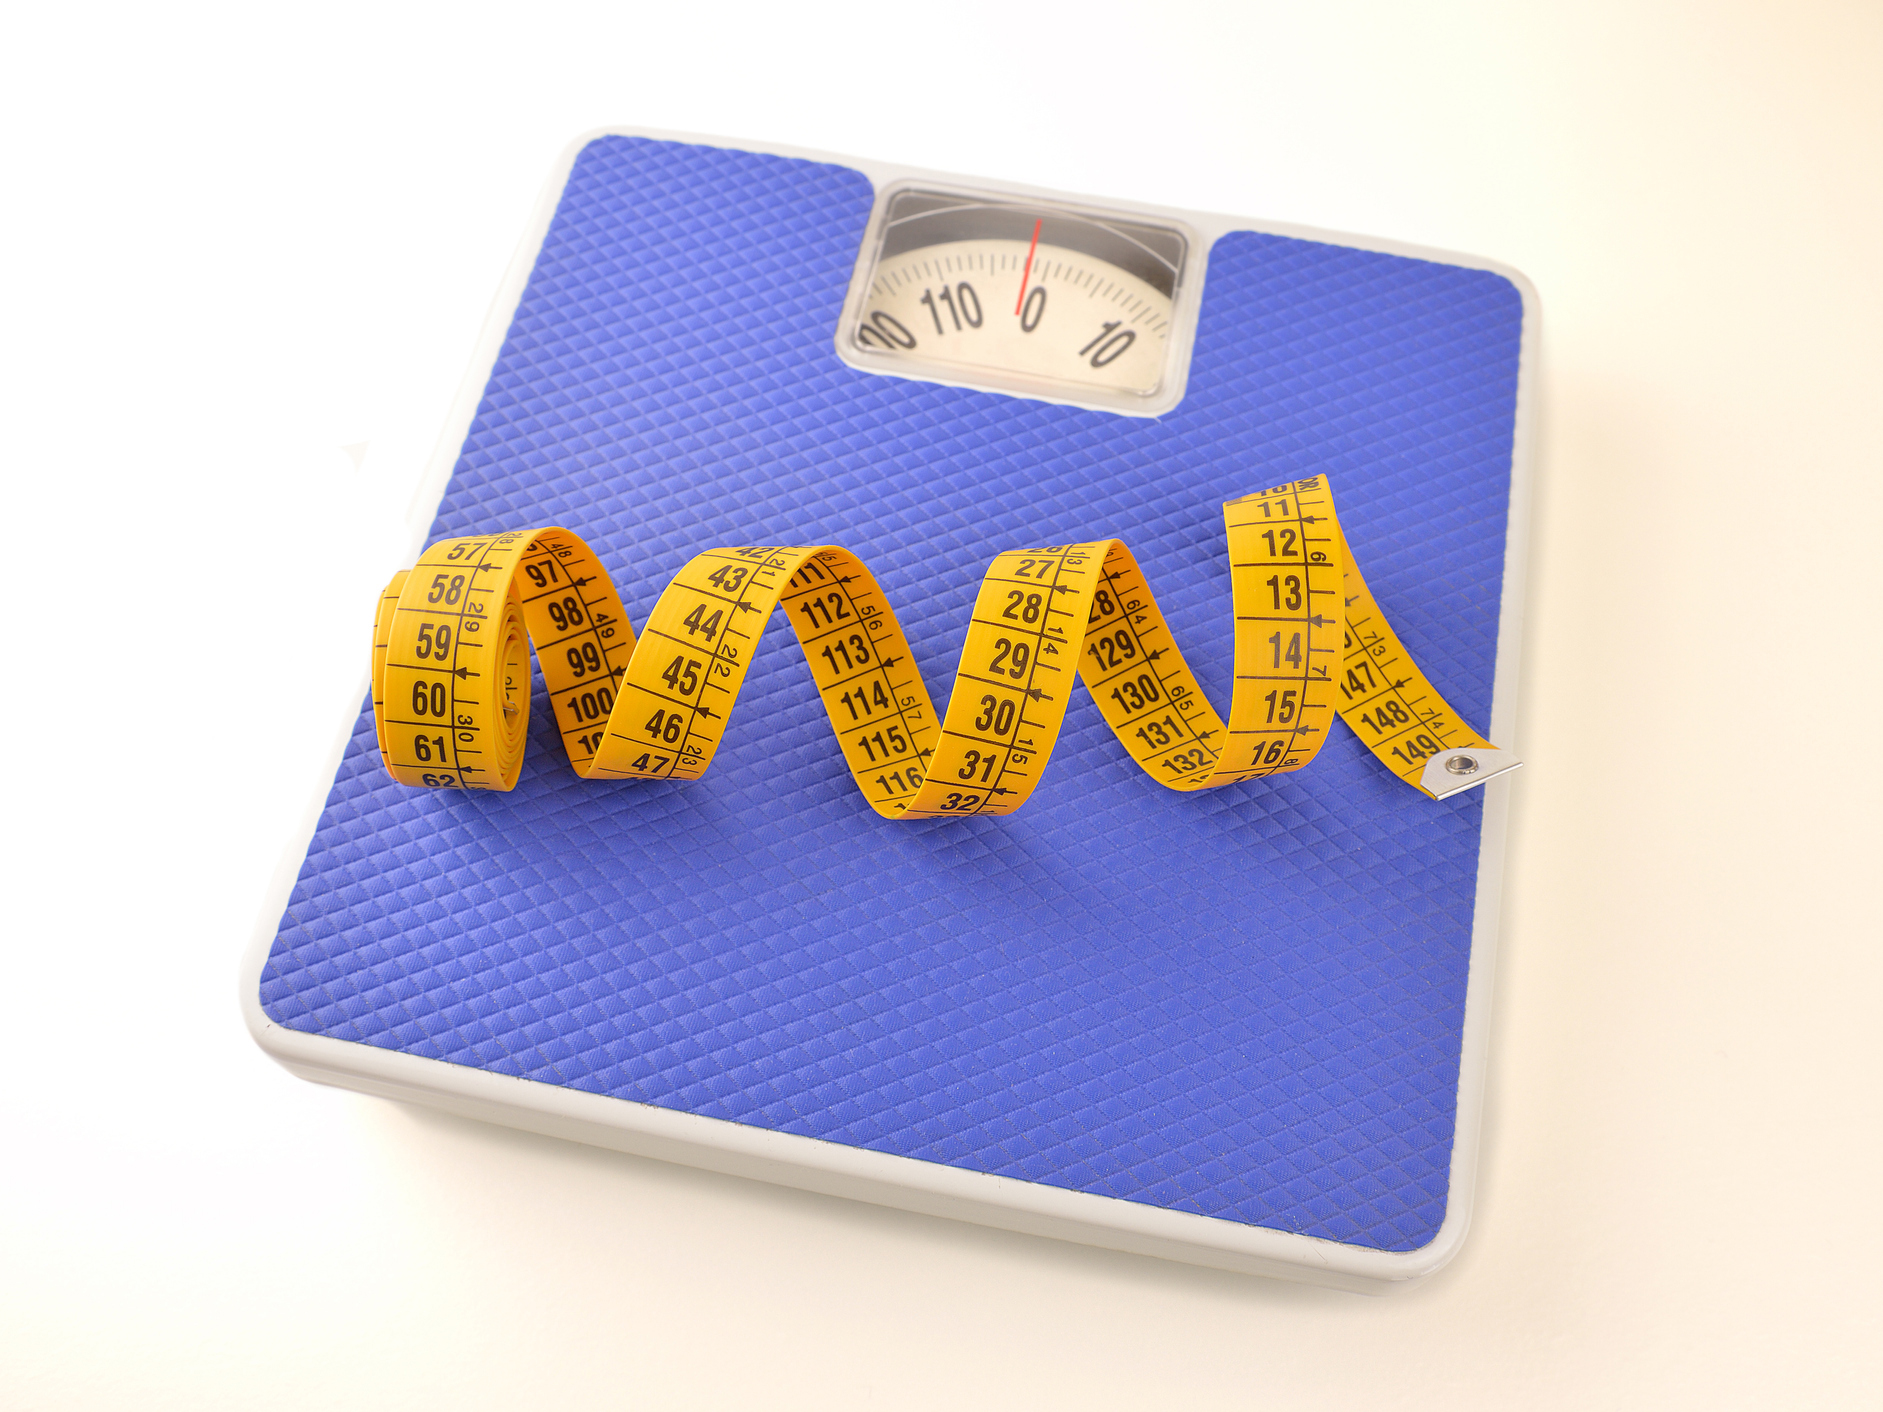 Why BMI may be the worst way to measure your health